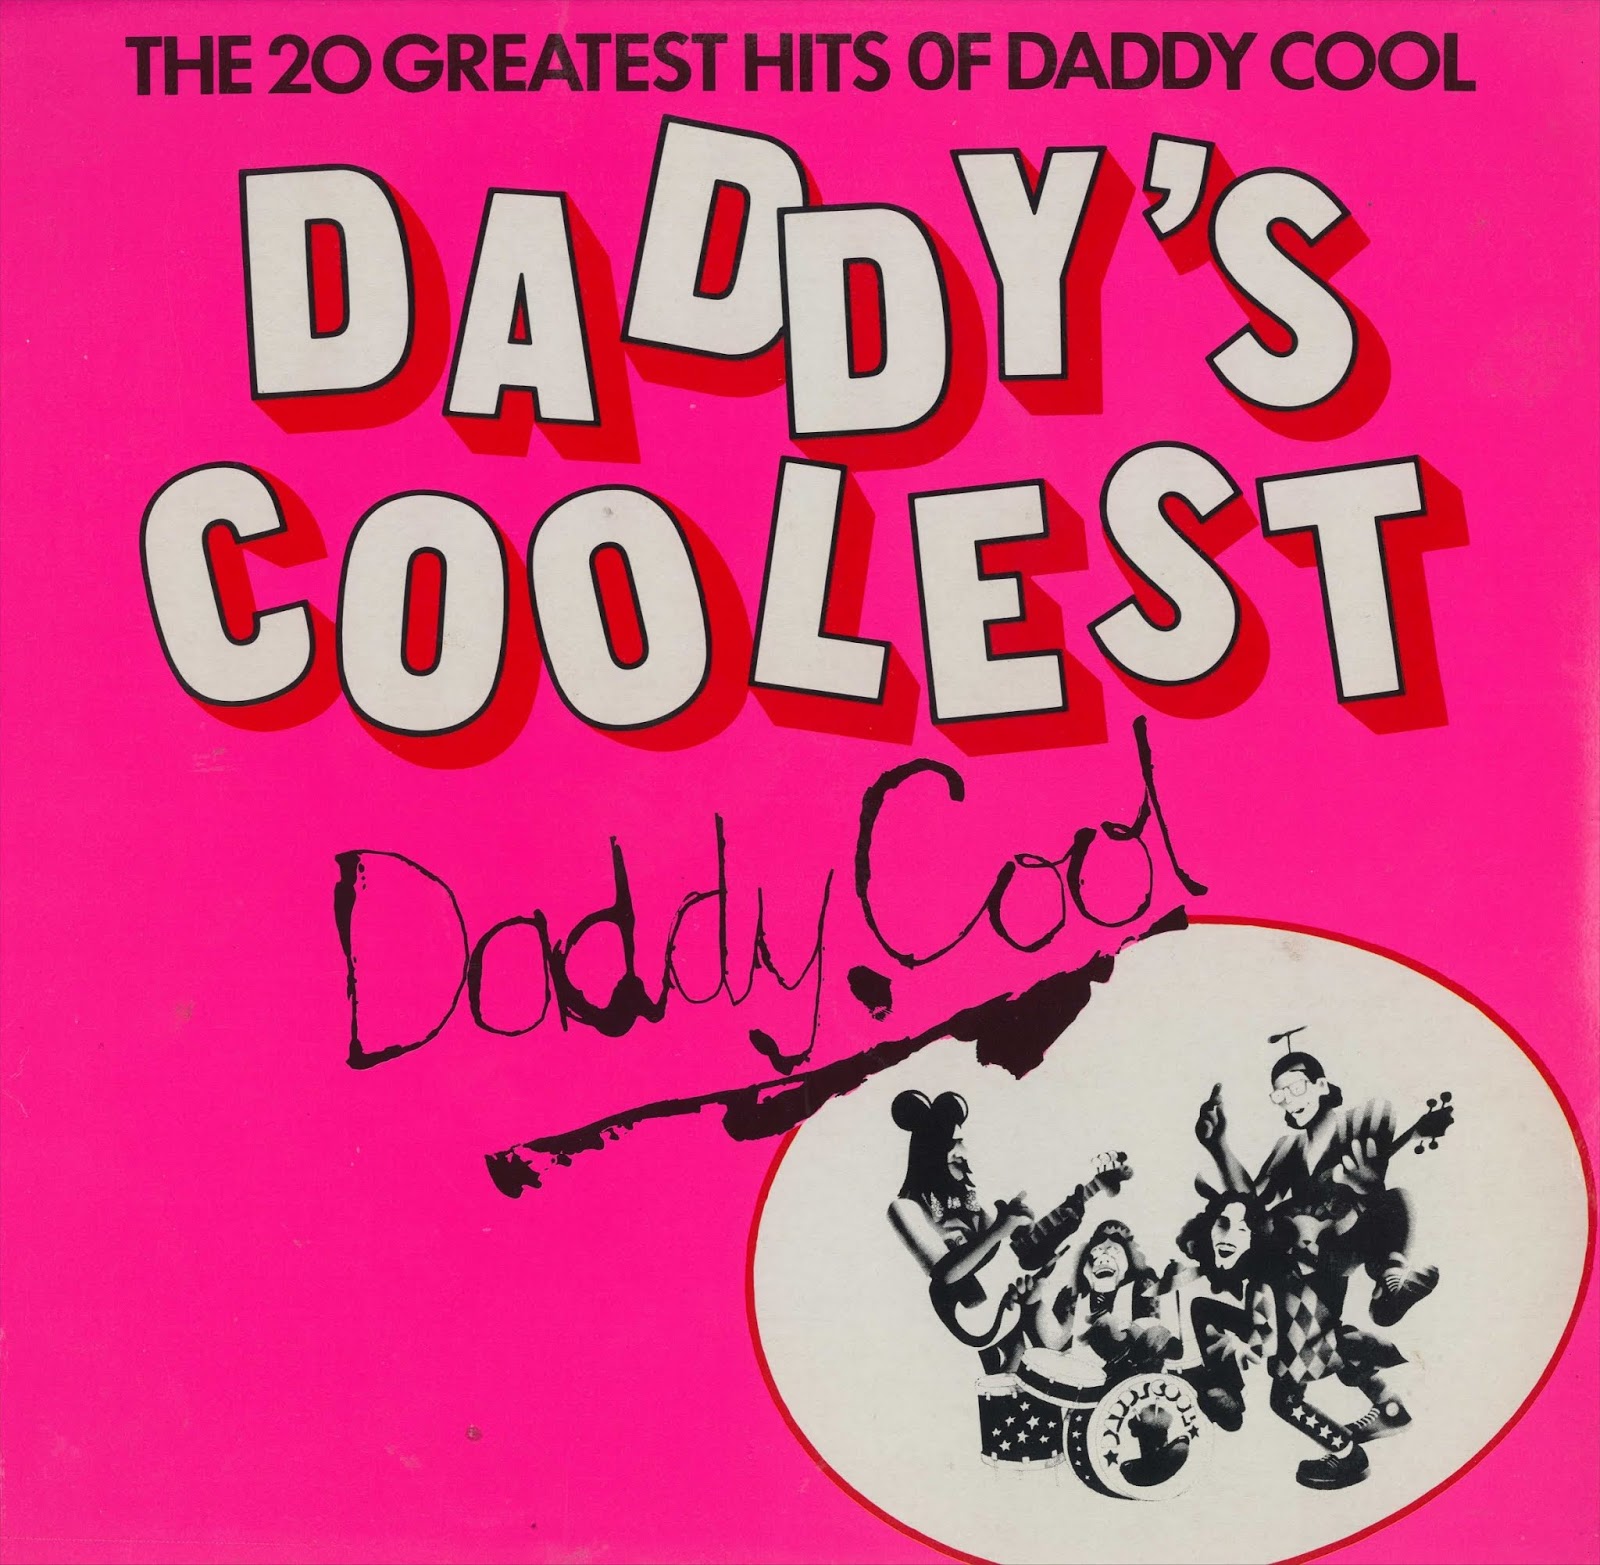 Hell s greatest dad кимико. Daddy cool. Daddy Daddy cool. Daddy cool перевод. Chilly Greatest Hits.